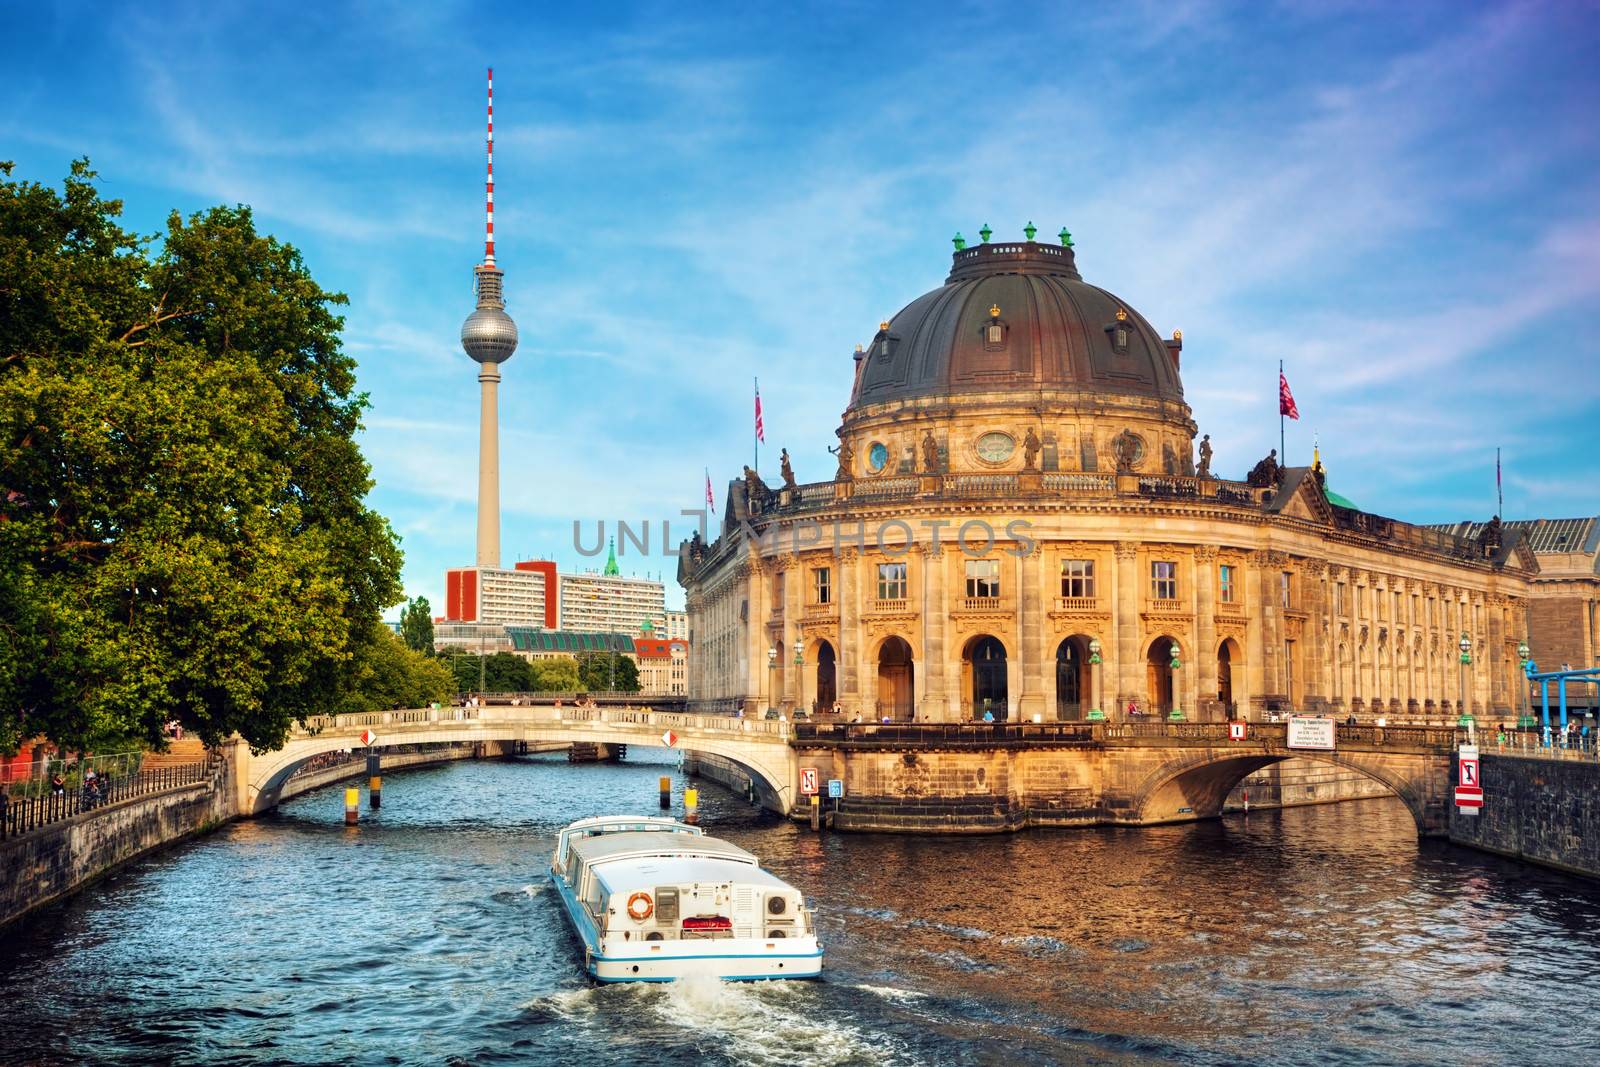 The Bode Museum on the Museum Island in Berlin, Germany. Tourist ship on River Spree